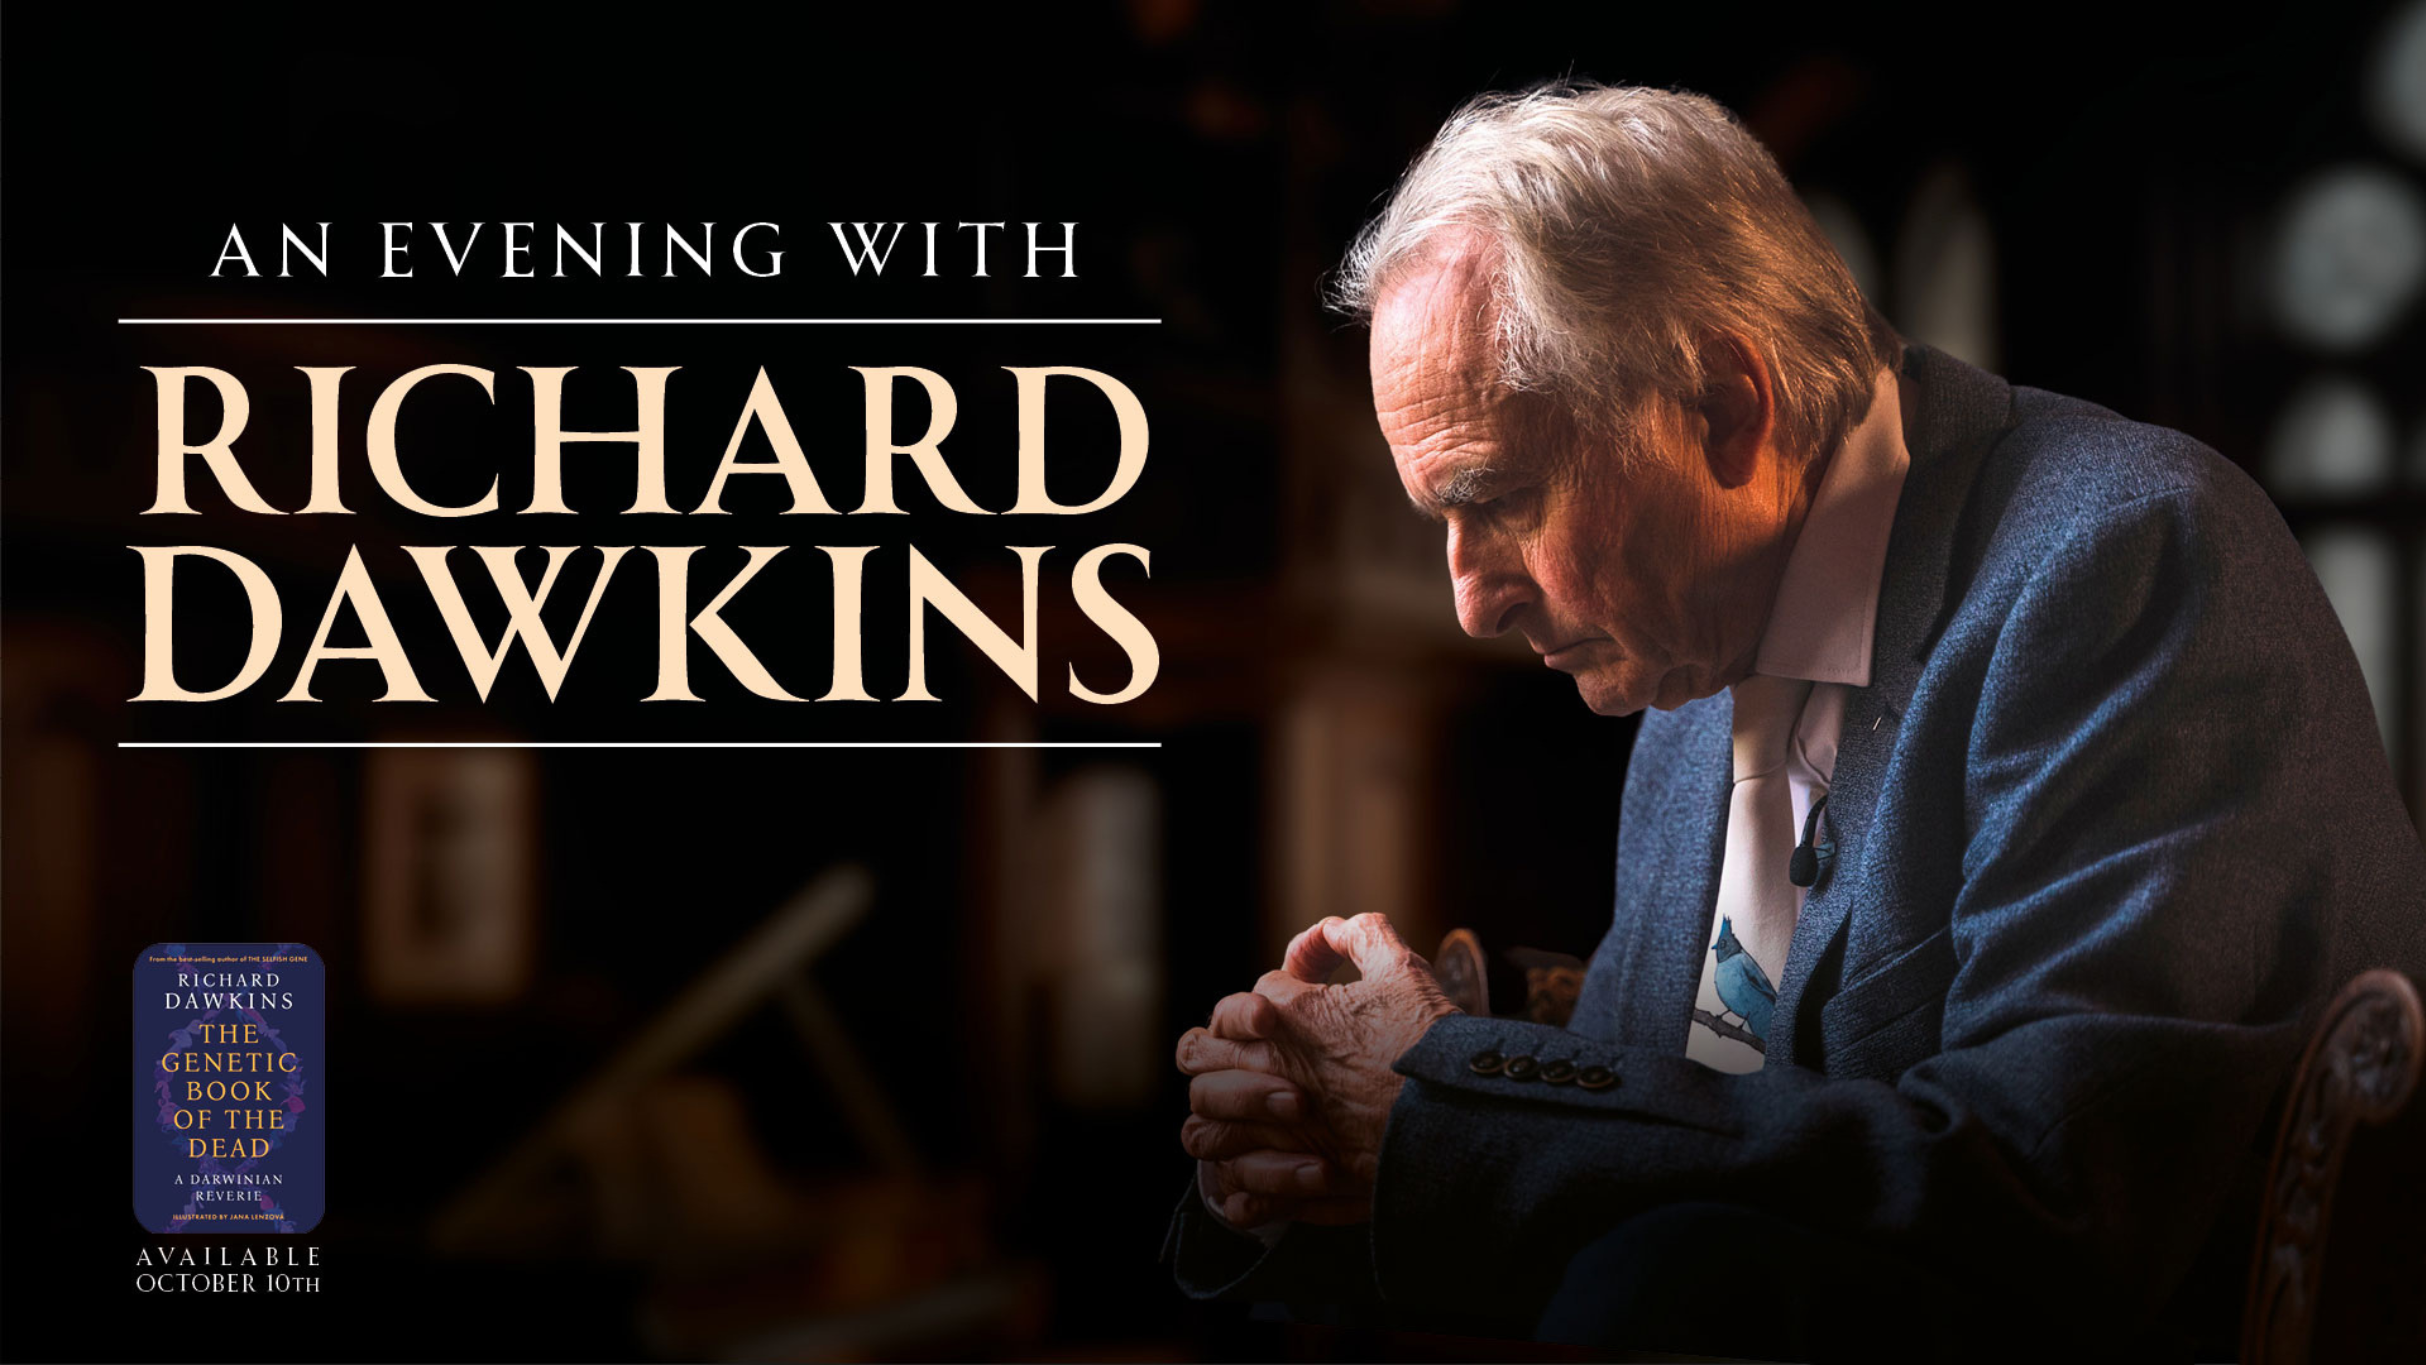 An Evening with Richard Dawkins and Friends presale code for your tickets in Oxford